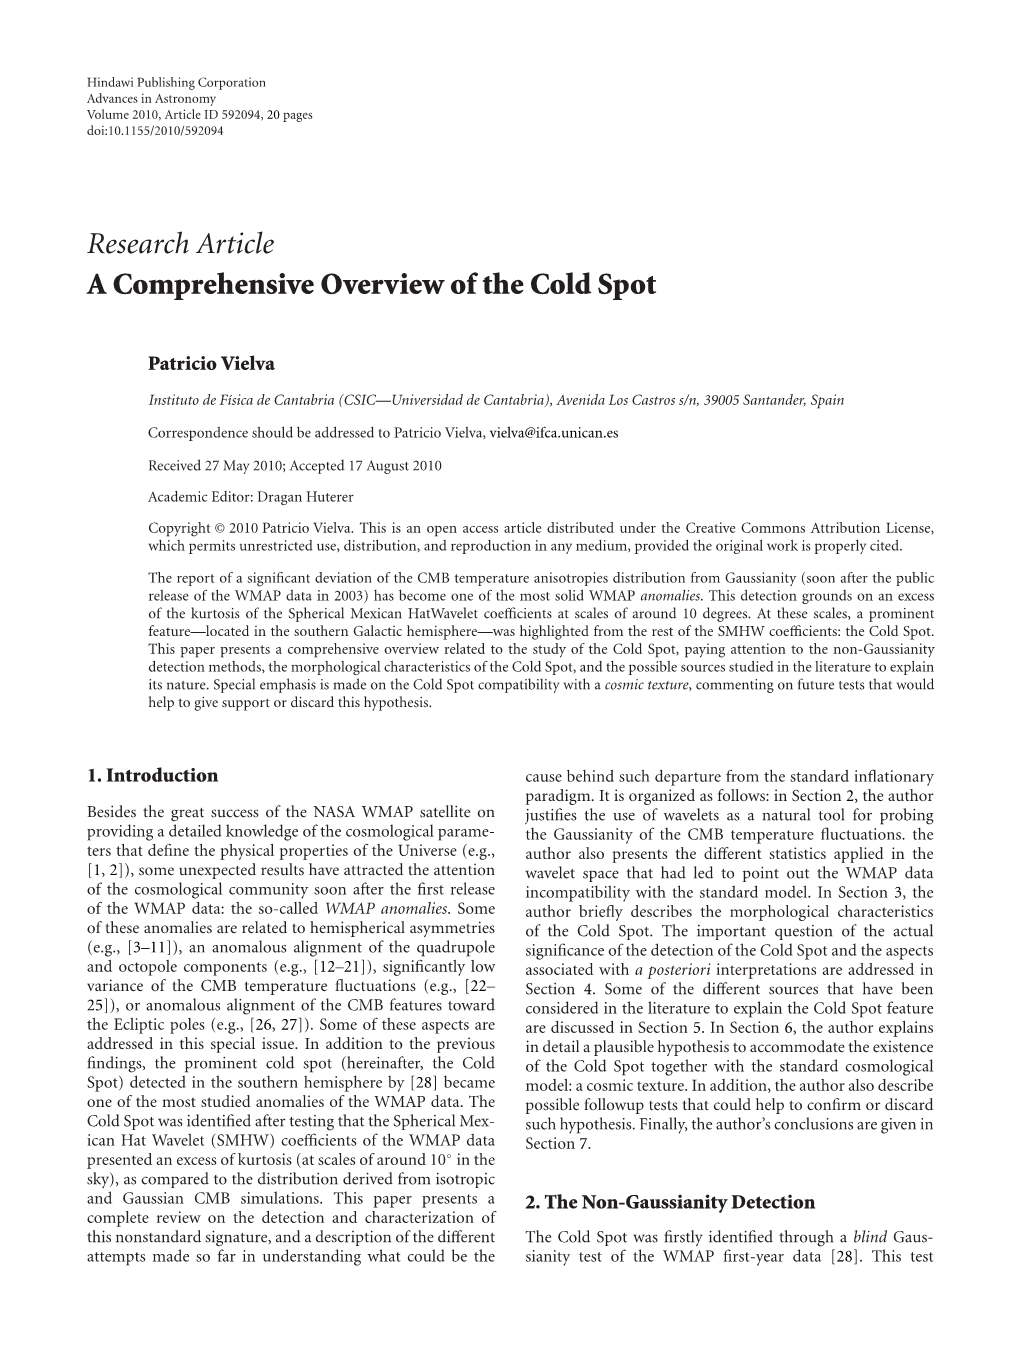 Research Article a Comprehensive Overview of the Cold Spot